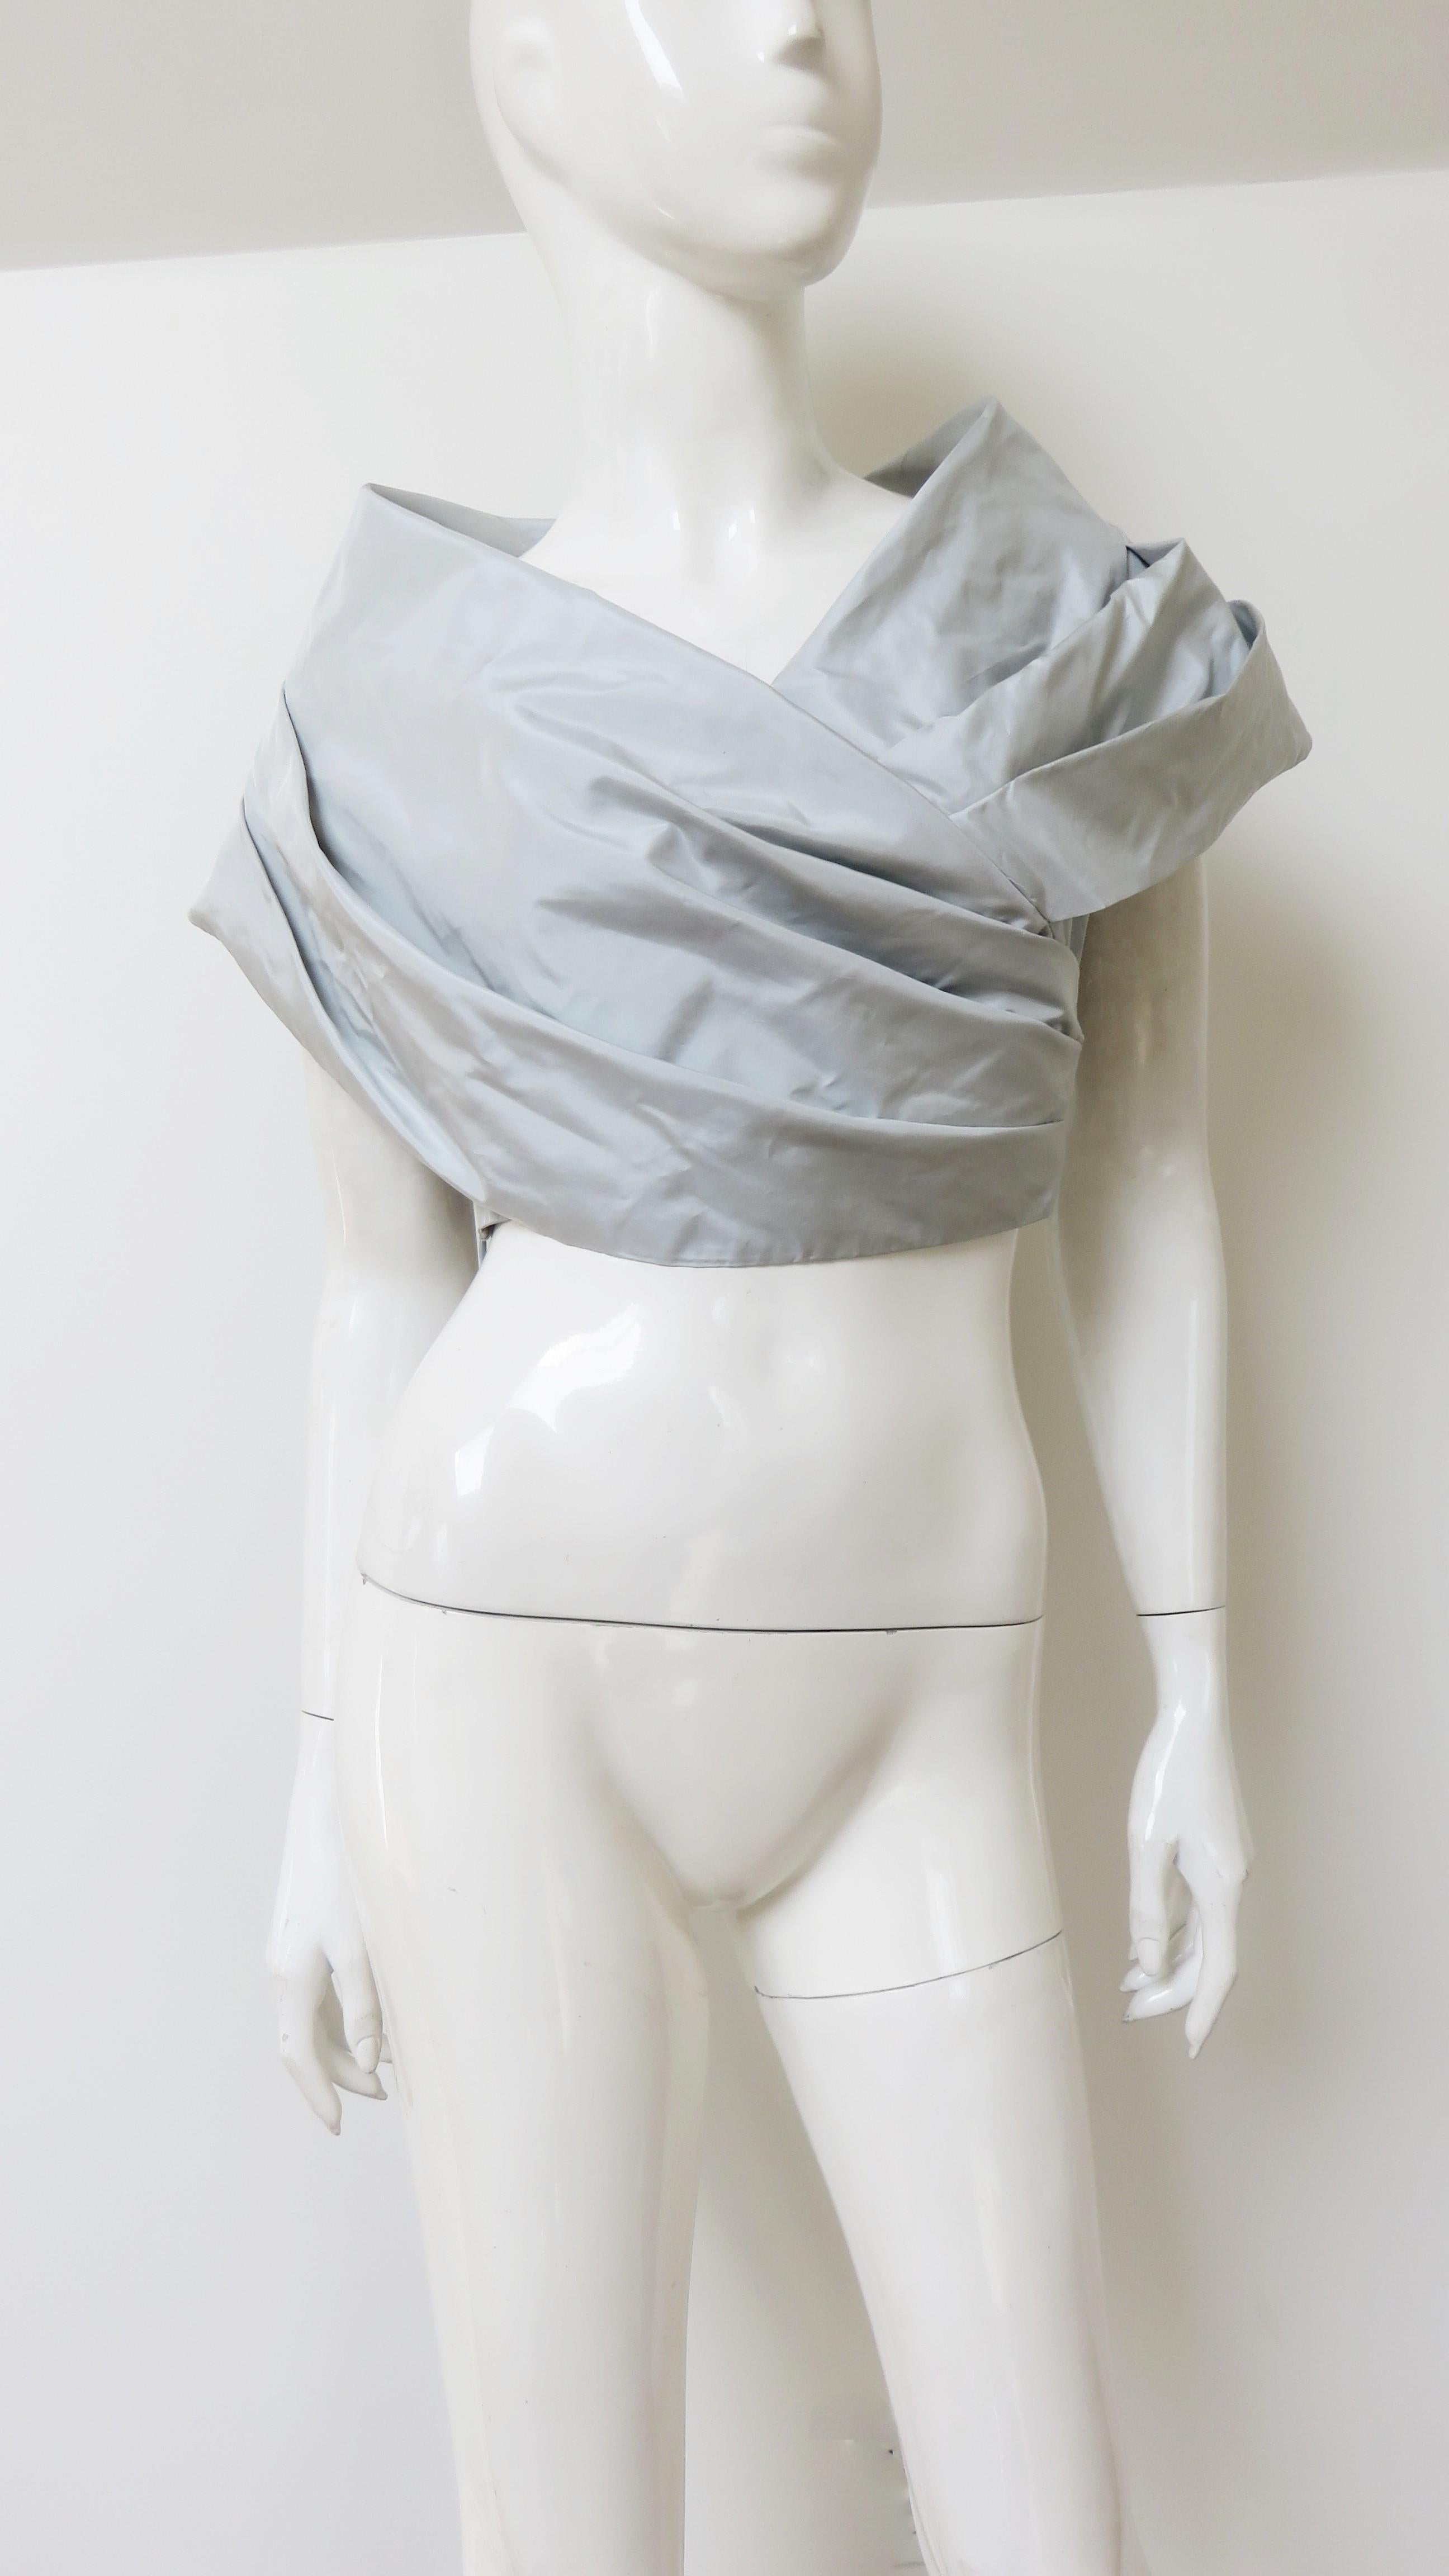 A light grey silk crop top by Douglas Anderson.  It has a draped portrait collar falling in folds across the upper arms crossing in the front.  It is lined in the same fabric and has a side zipper. New with tags.
Fits sizes Small, Medium.  Marked US